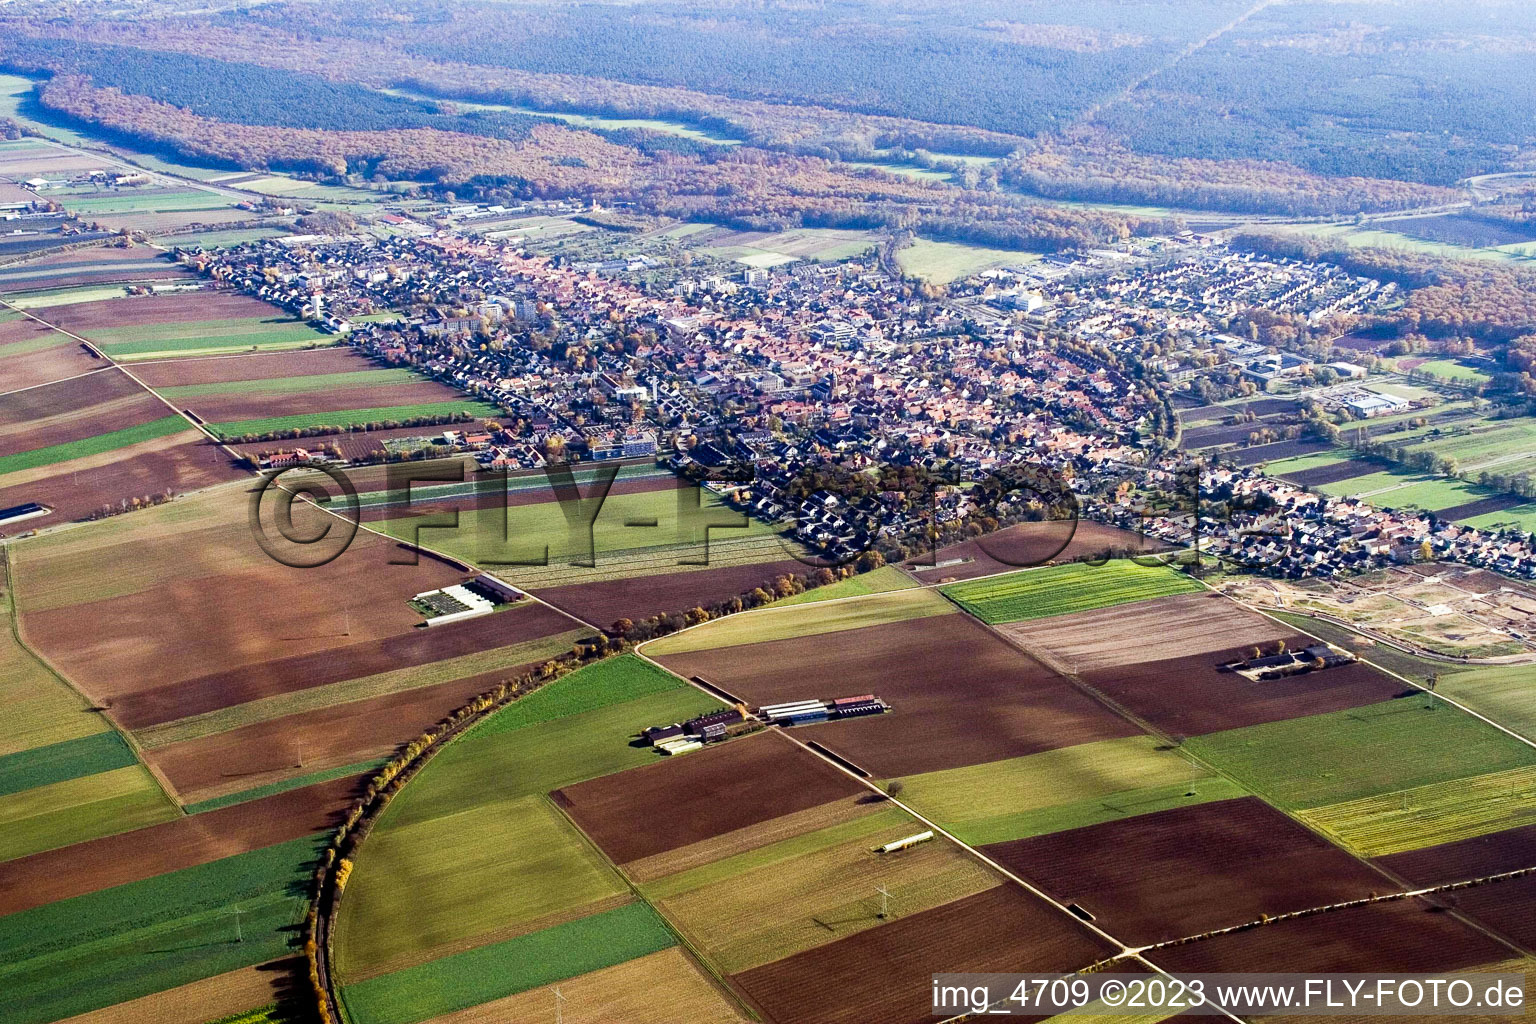 Aerial photograpy of From northwest in Kandel in the state Rhineland-Palatinate, Germany